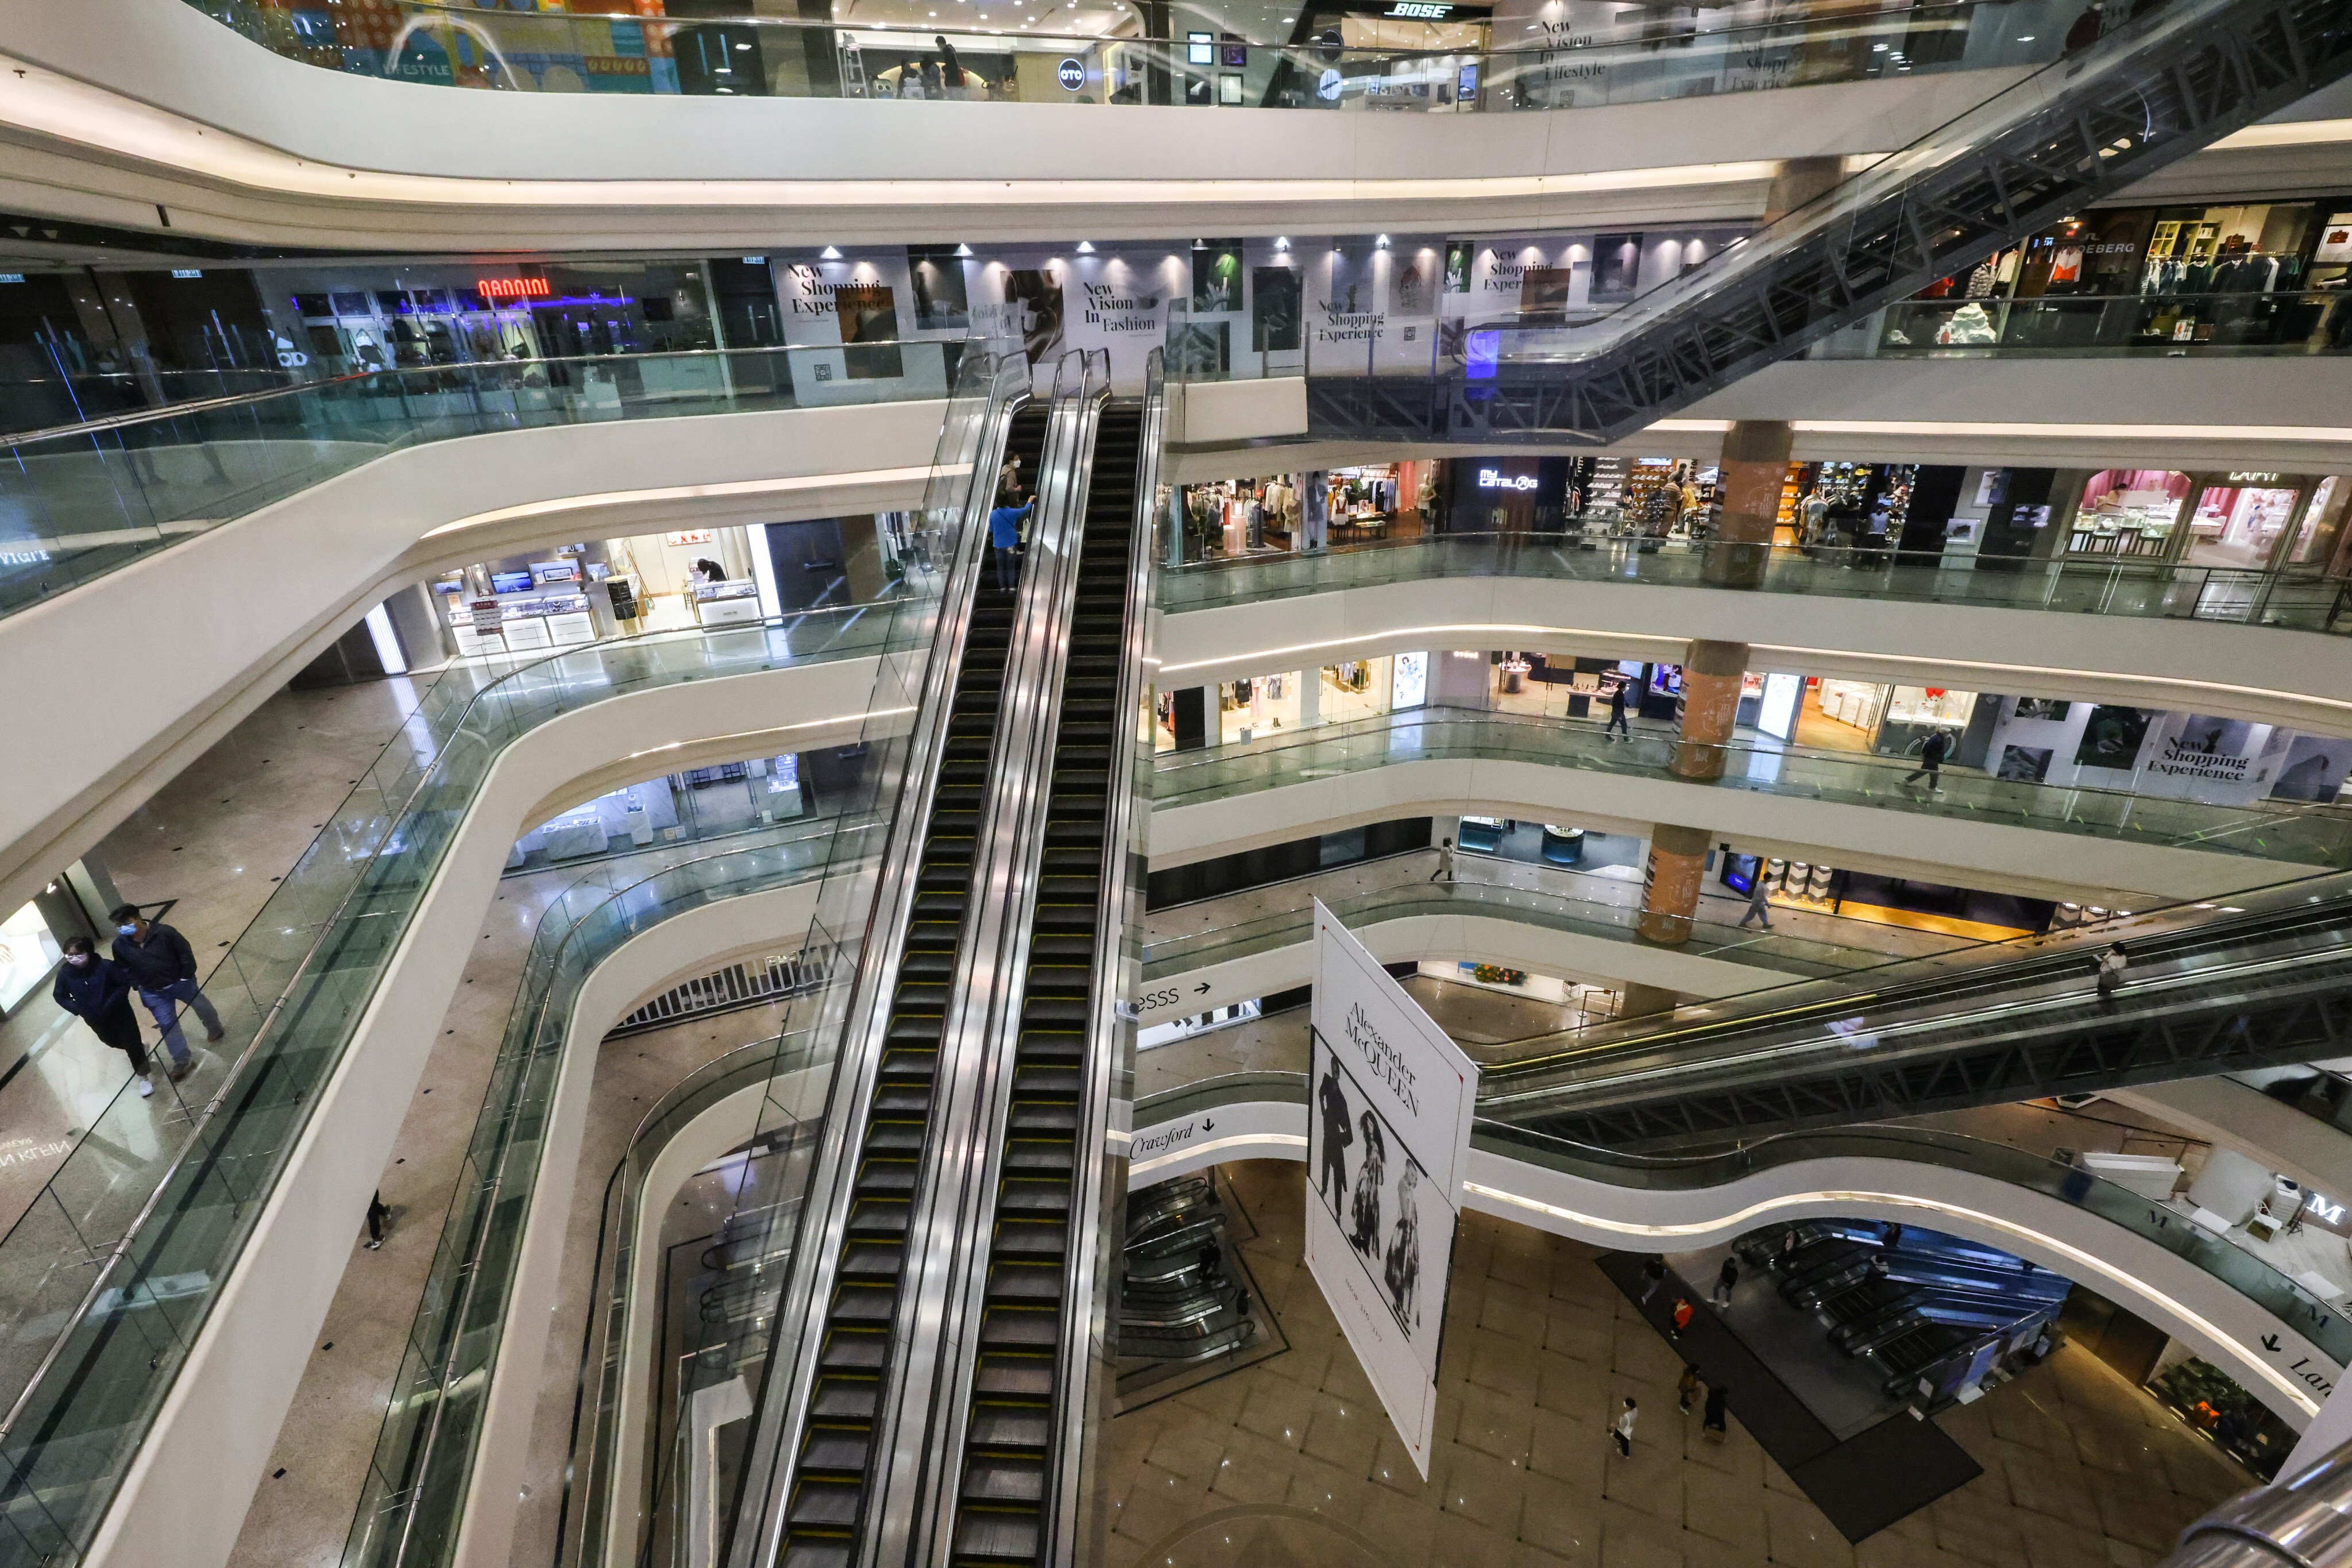 Malls across Hong Kong are empty due to rising coronavirus infections in the city. Photo: Dickson Lee